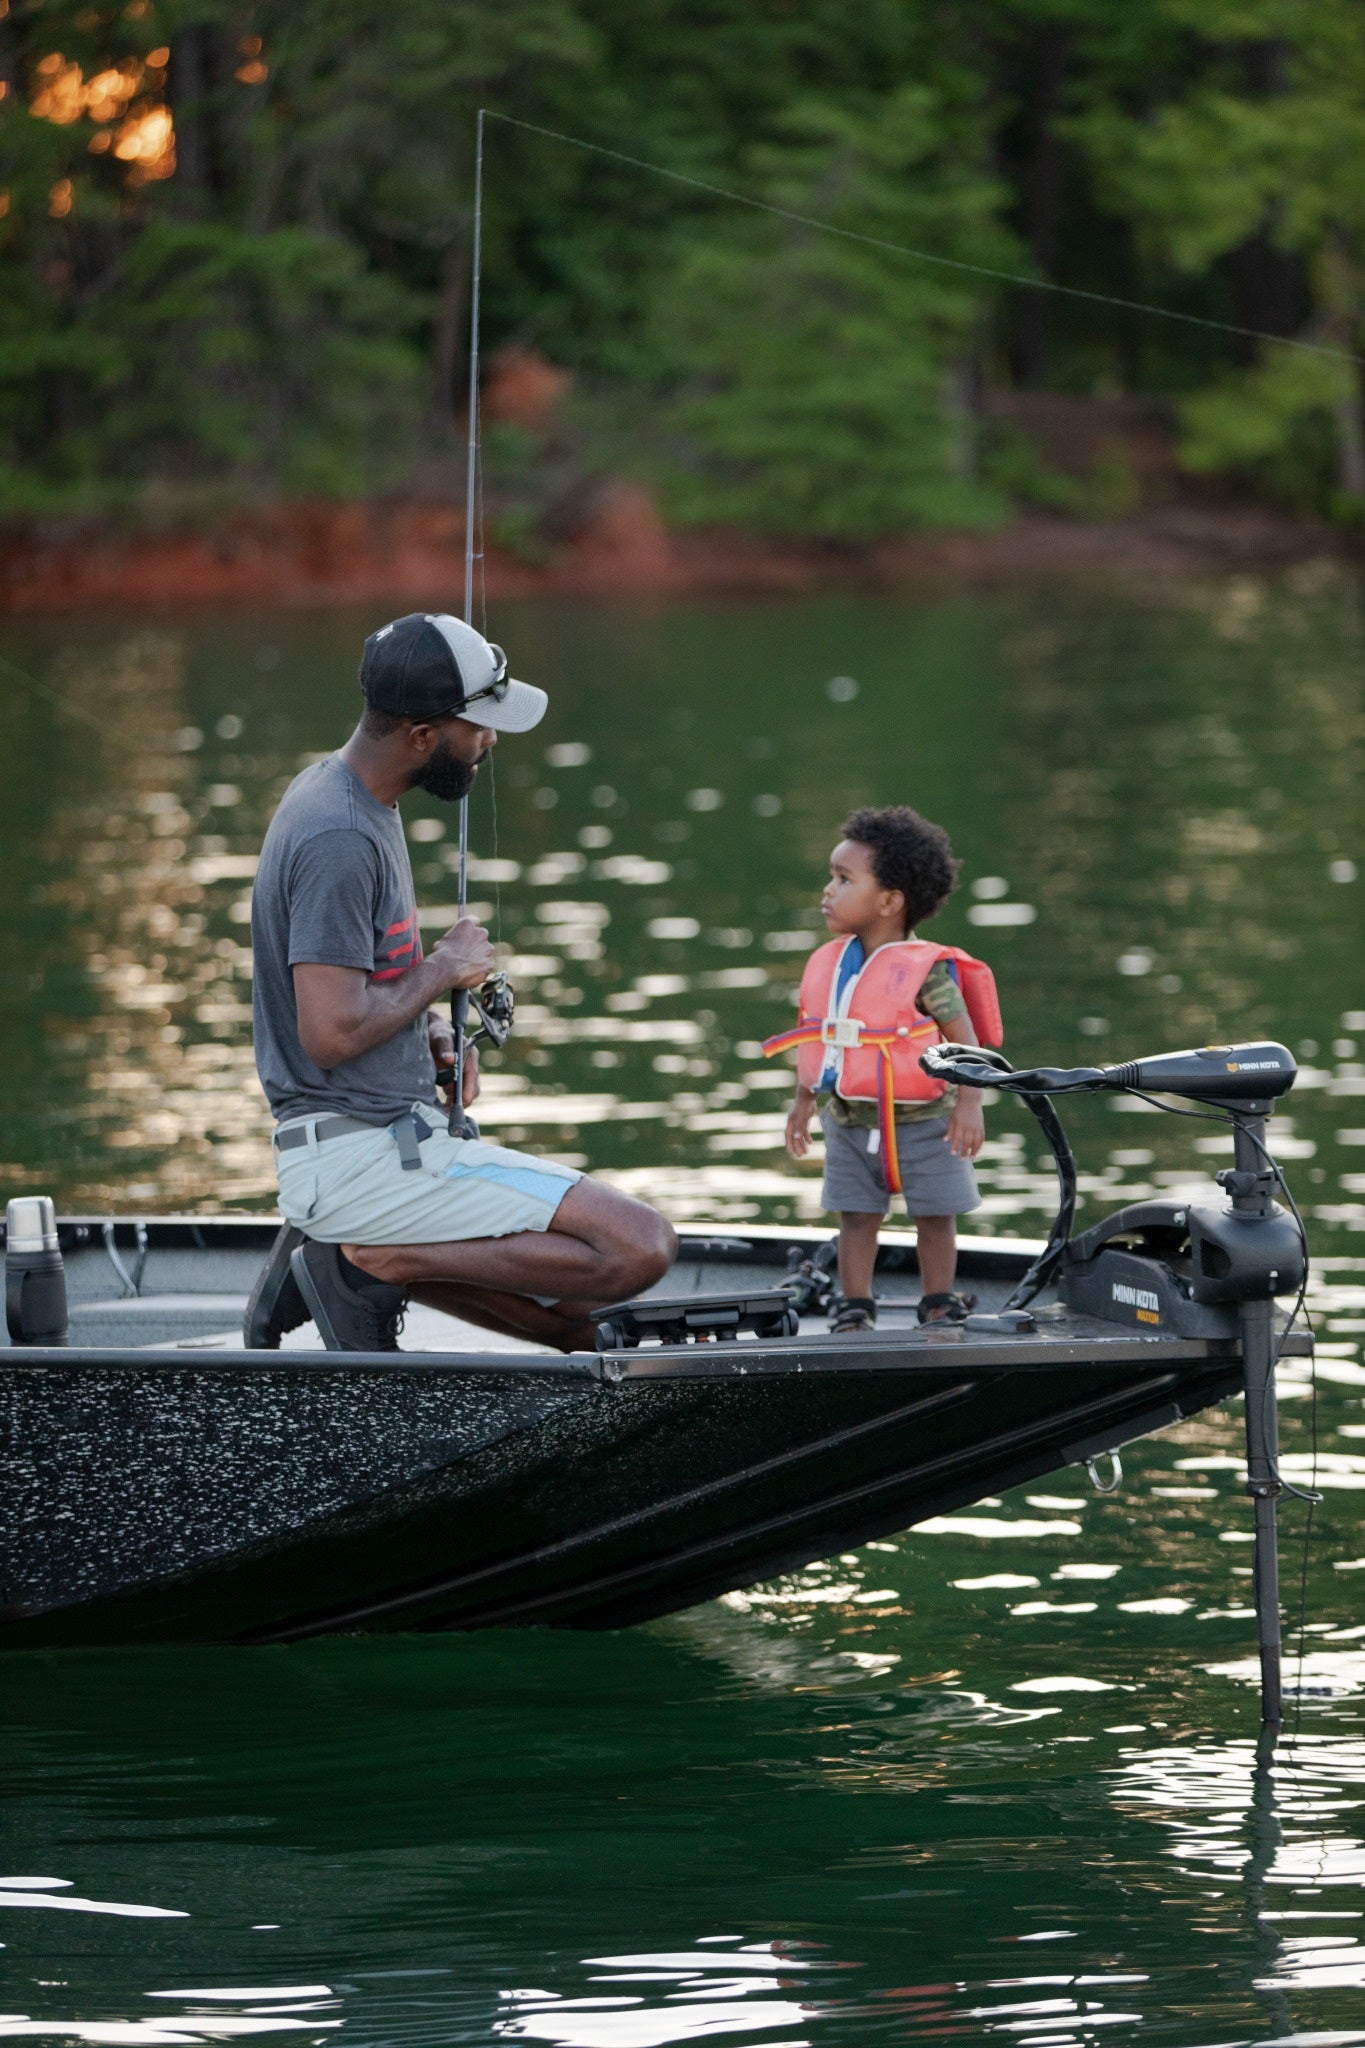 Brian Latimer, Stanley Ambassador and Tournament Bass Fisherman, standing on the bow of his fishing boat on a lake.